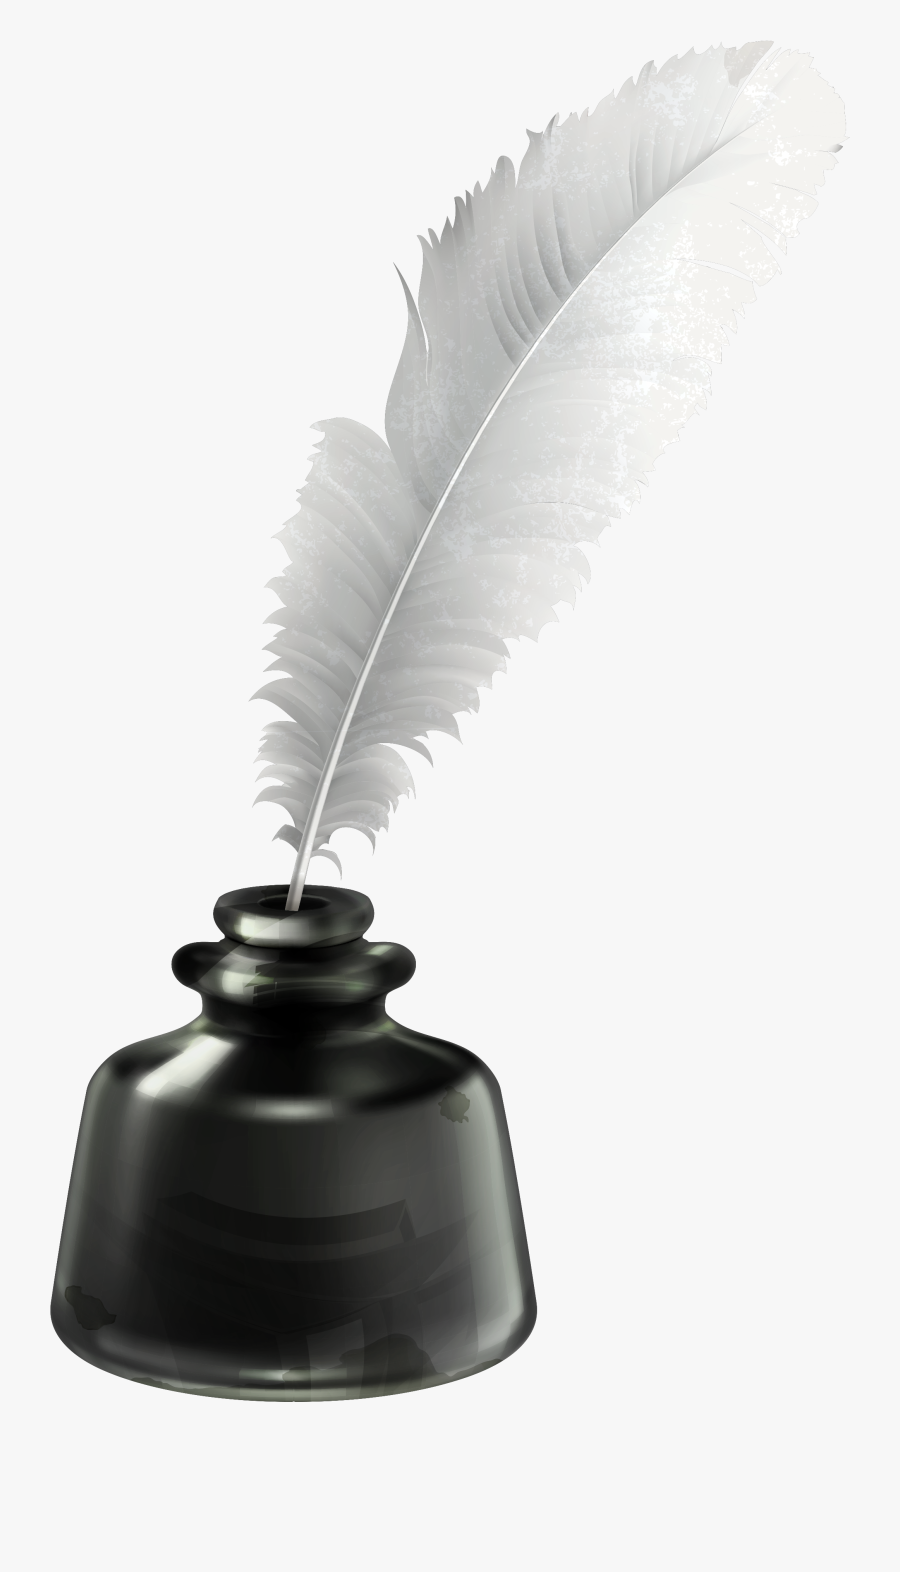 Quill And Ink Pot Transparent Png Vector Clipart - Ink Pot And Quill, Transparent Clipart